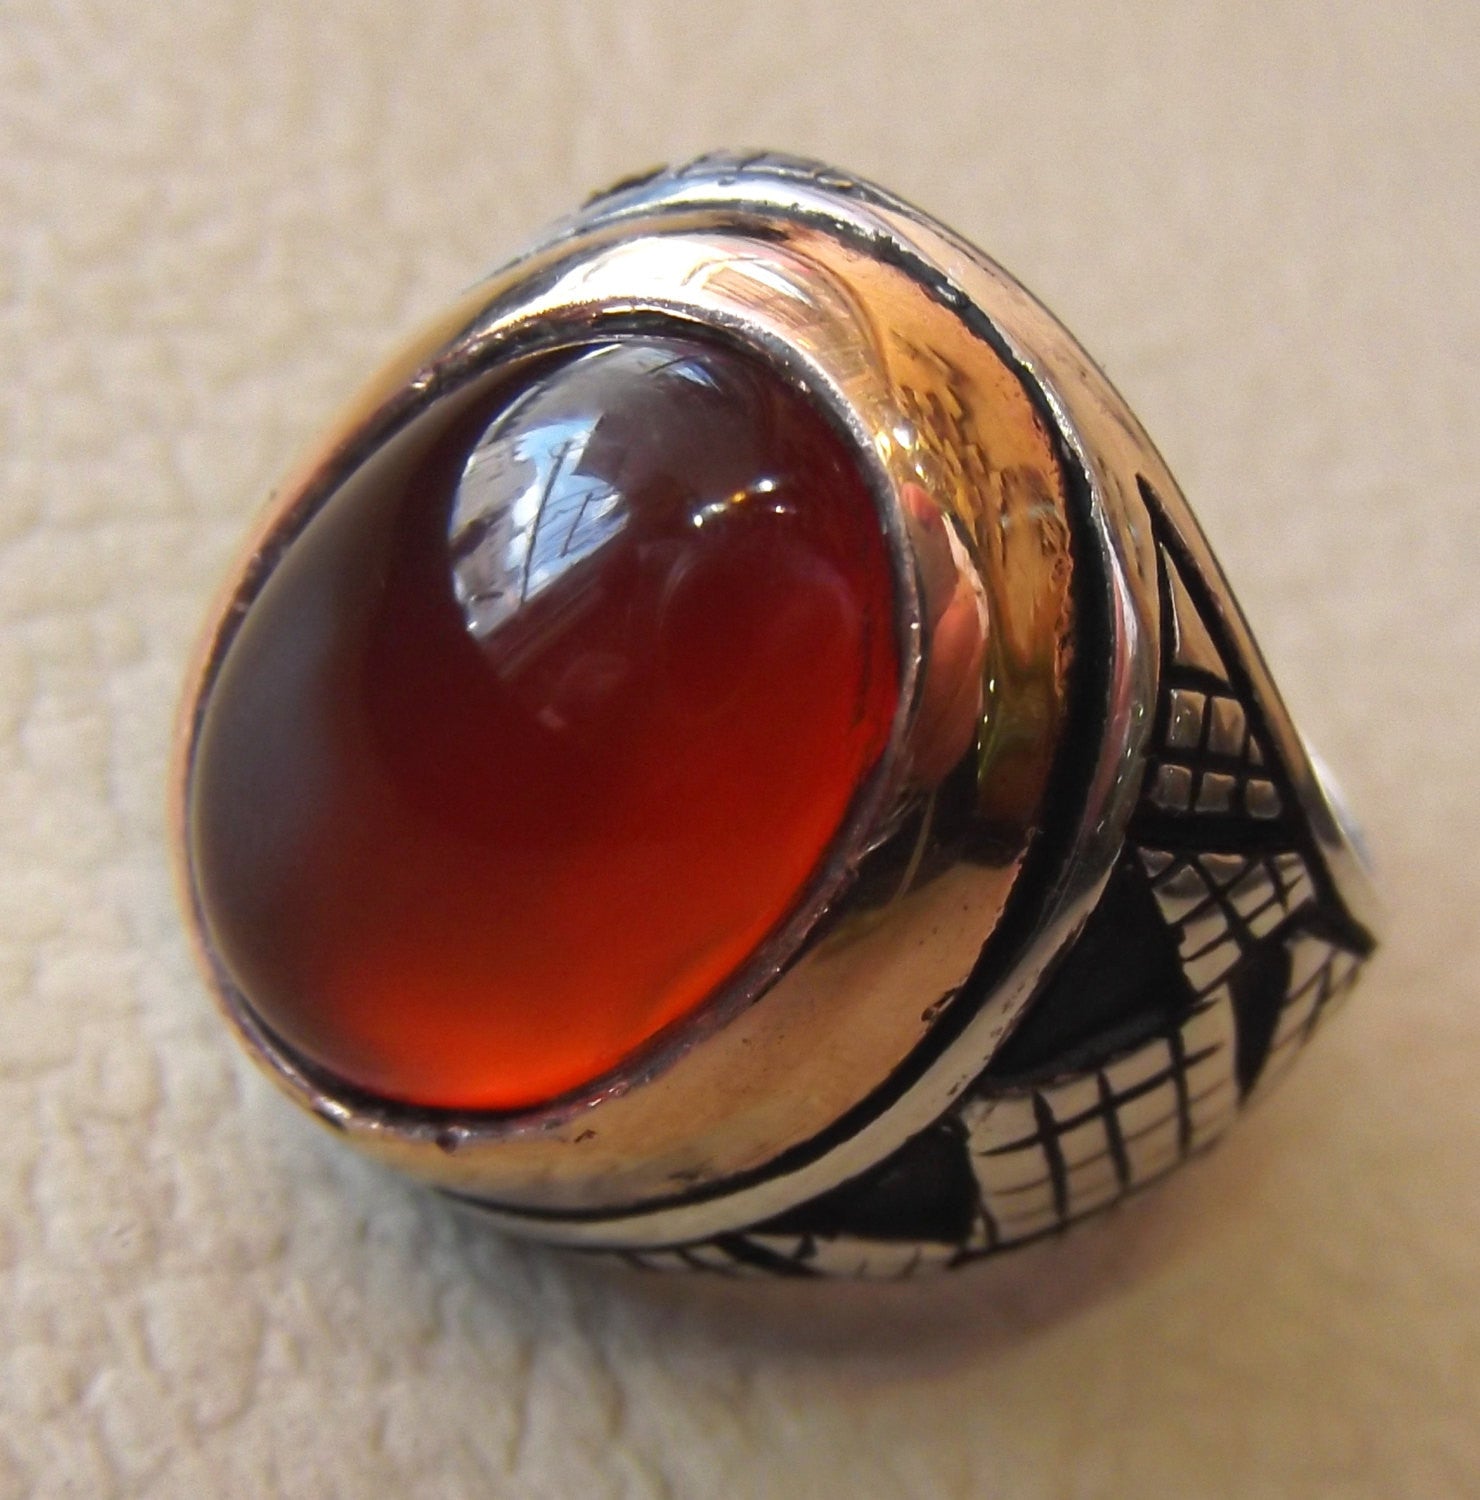 aqeeq carnelian agate cabochon oval red stone sterling silver 925 men ring arabic turkish middle eastern ottoman style jewelry bronze frame